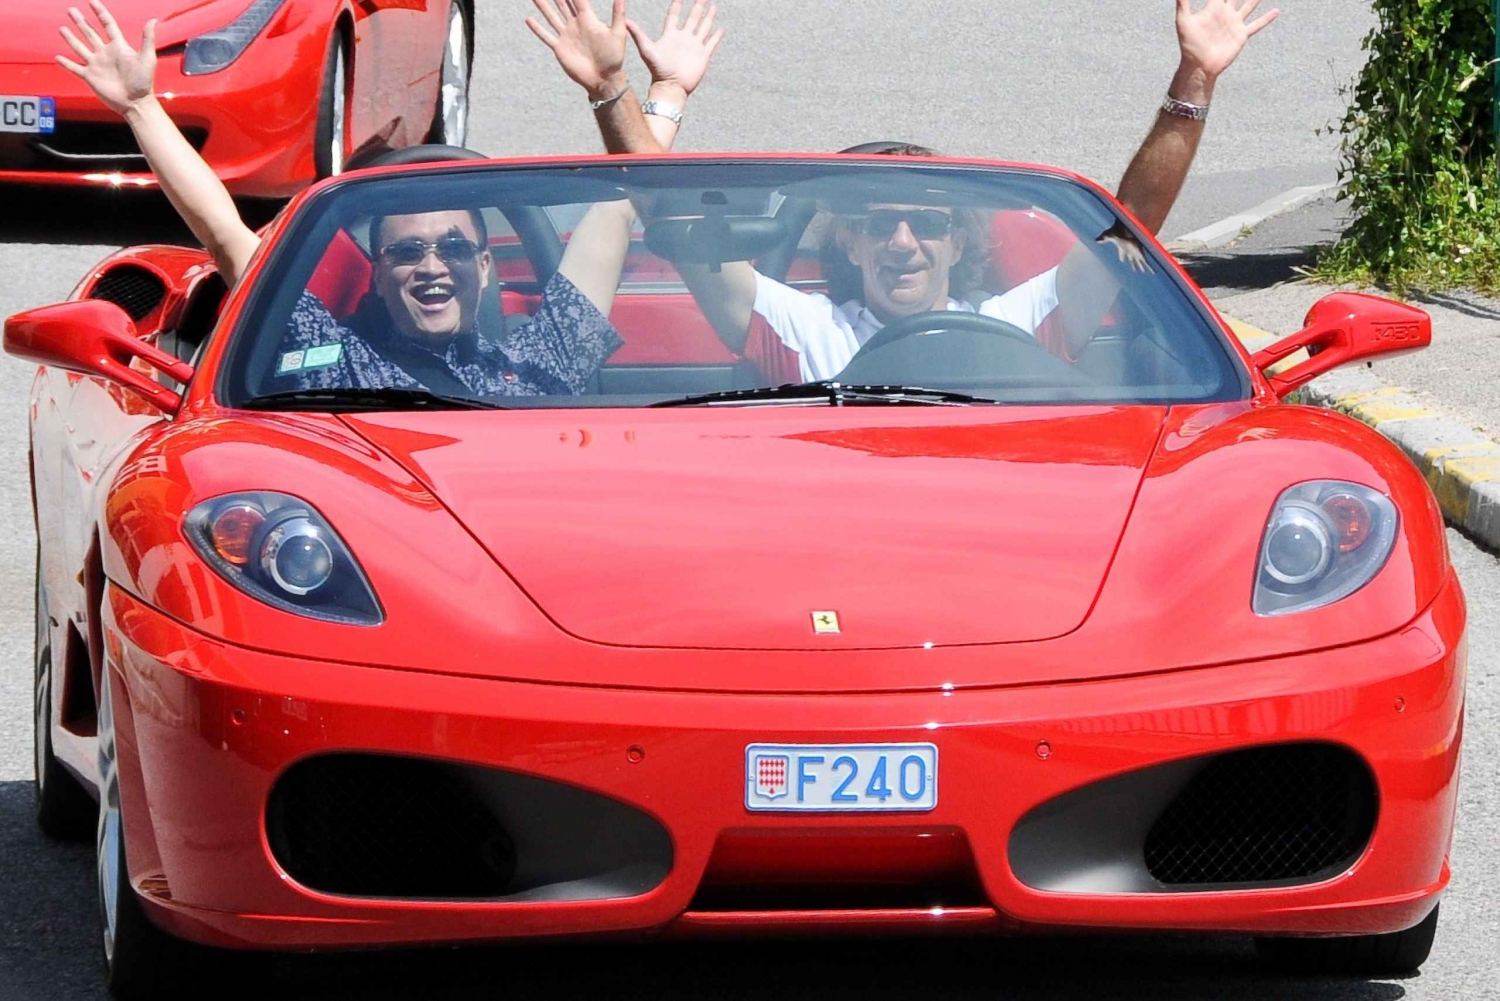 French Riviera Ferrari Driving Experience 15/30/60 Minutes